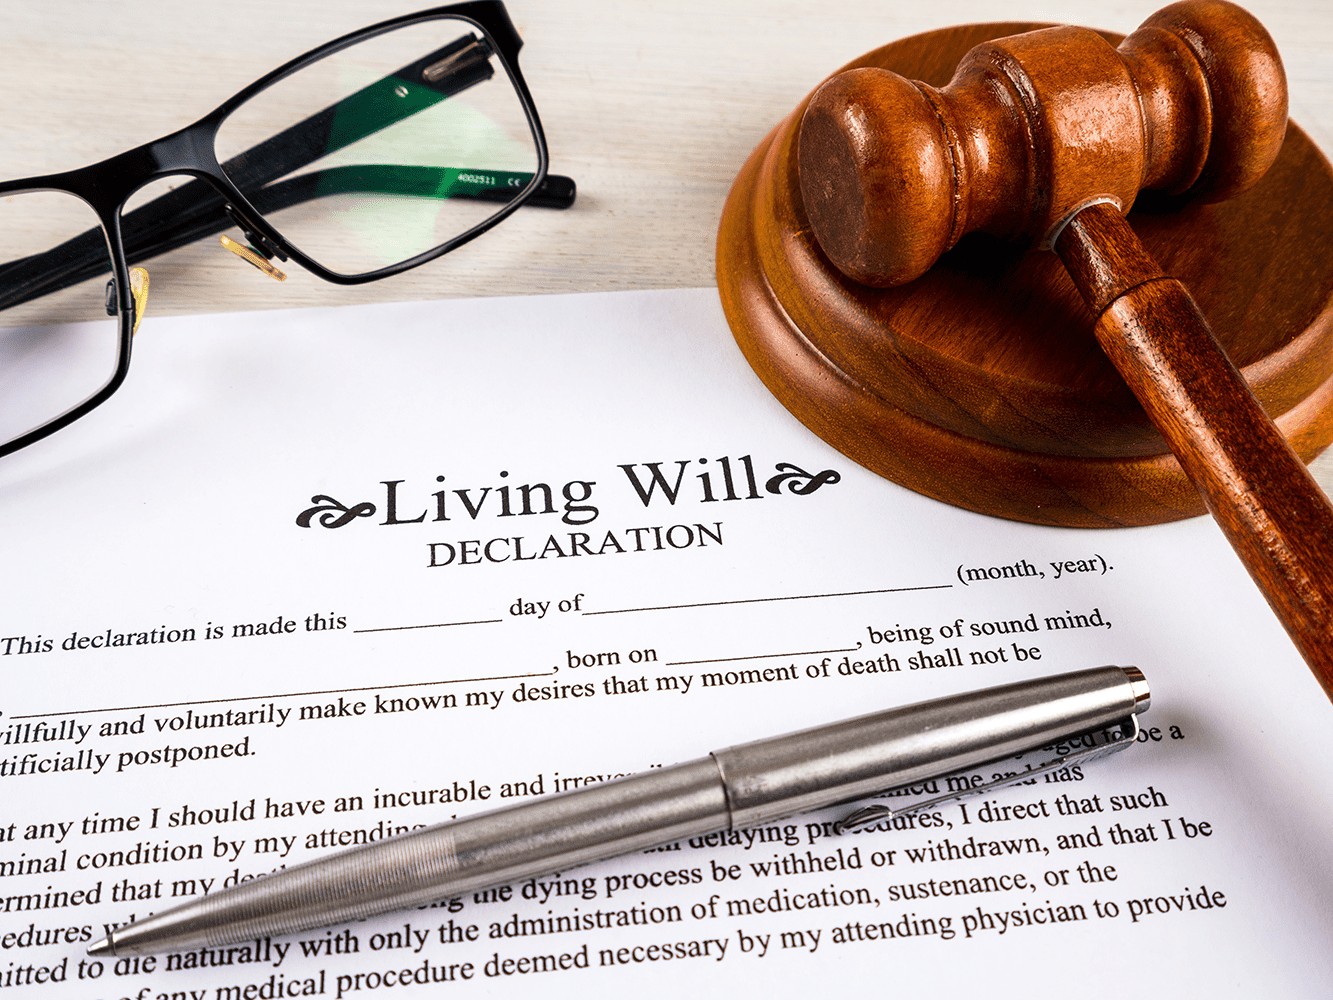 Living will declaration form with pen, gavel and striking block and glasses on top.